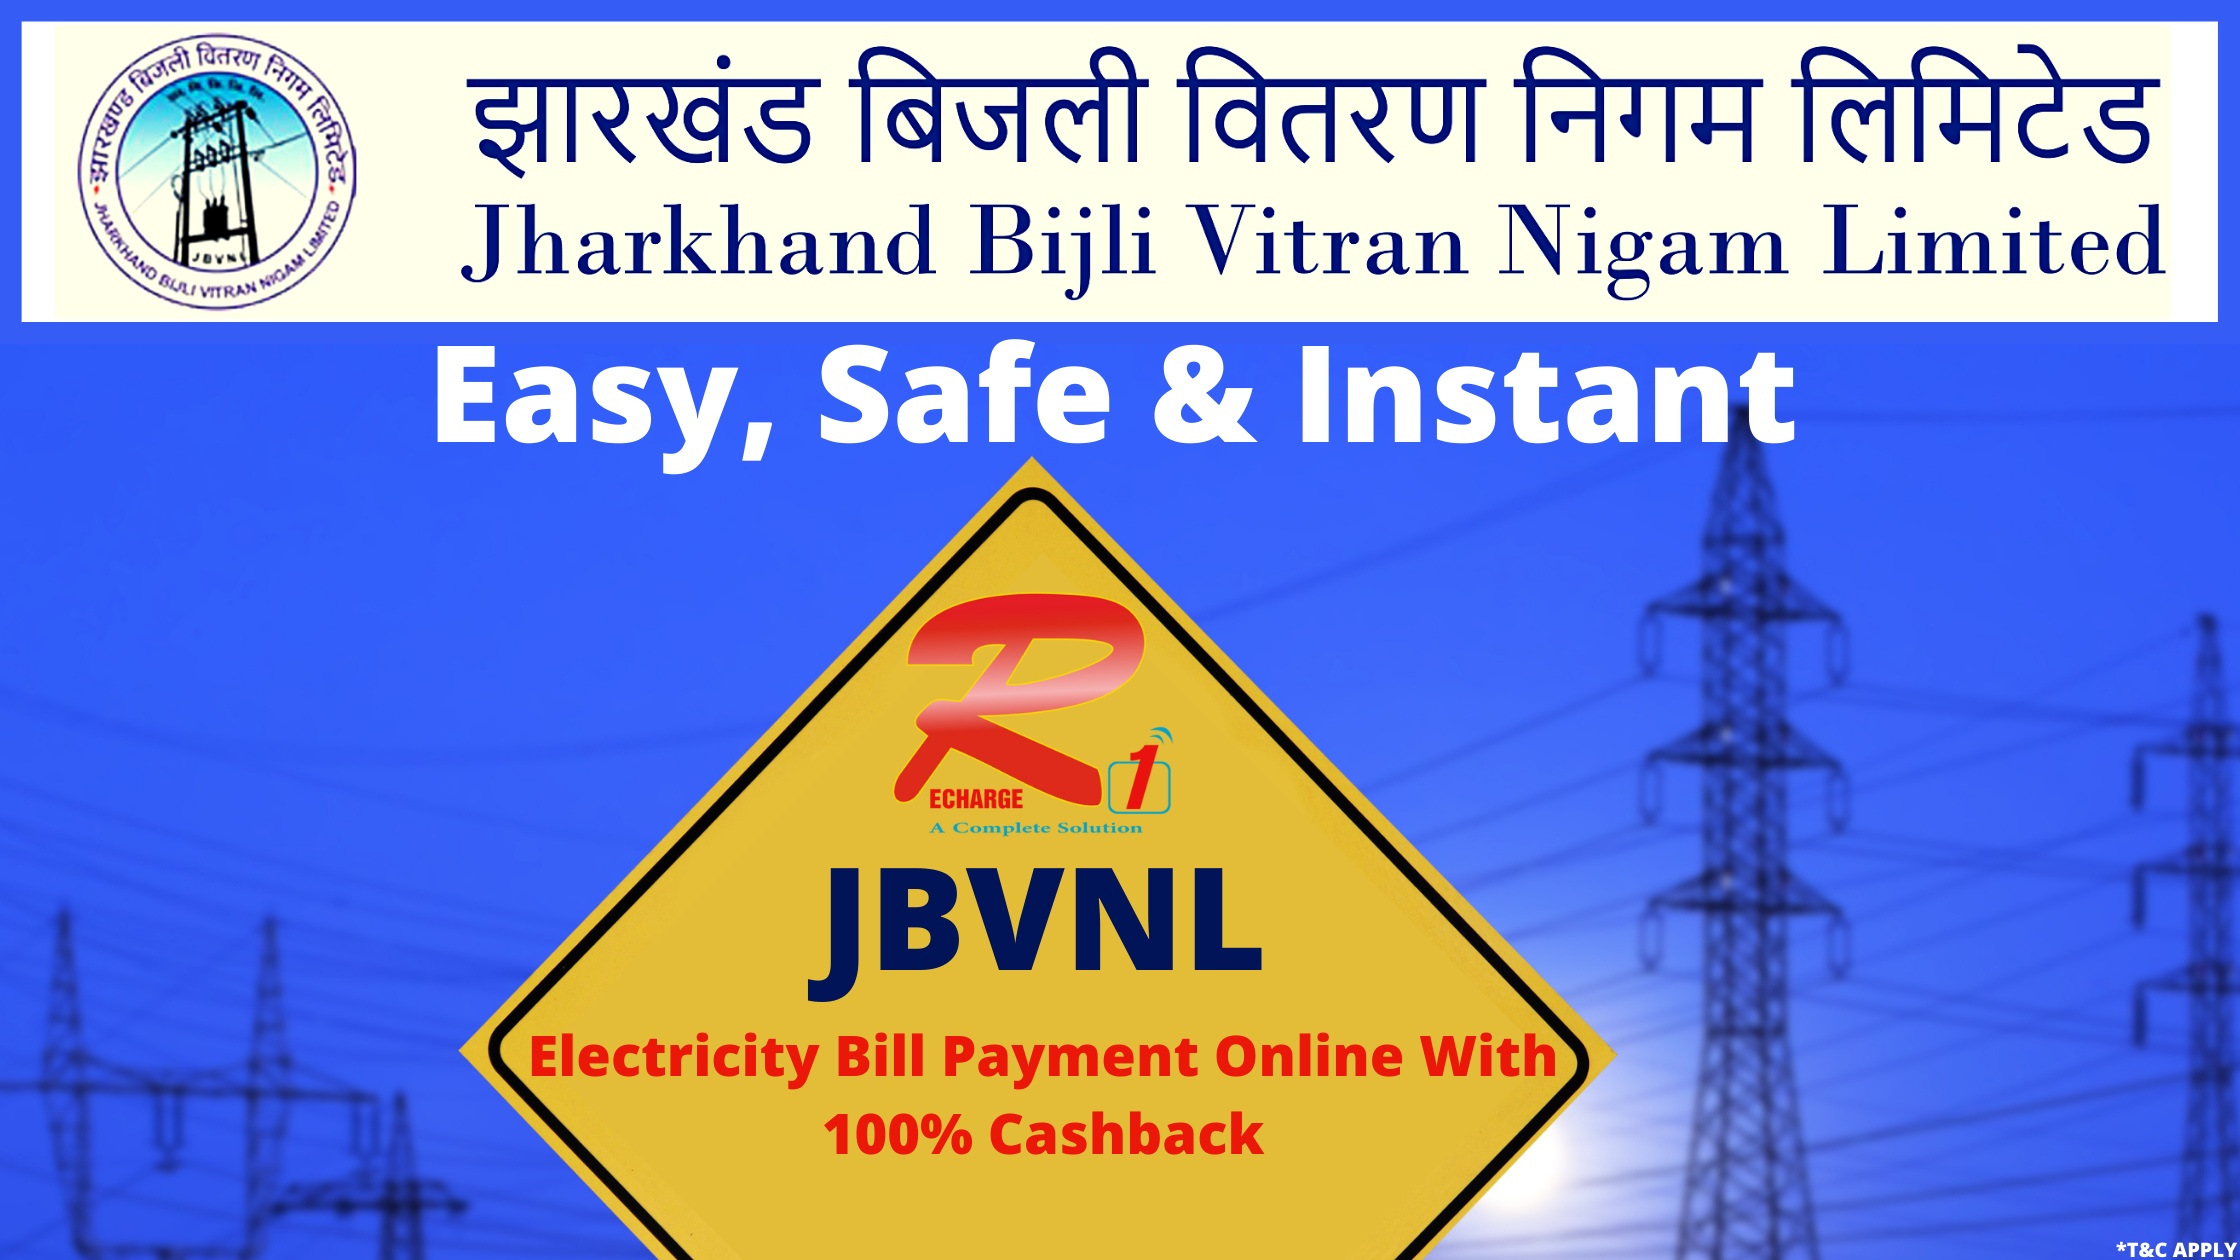  Easy, Safe & Instant: JBVNL Electricity Bill Payment Online With 100% Cashback